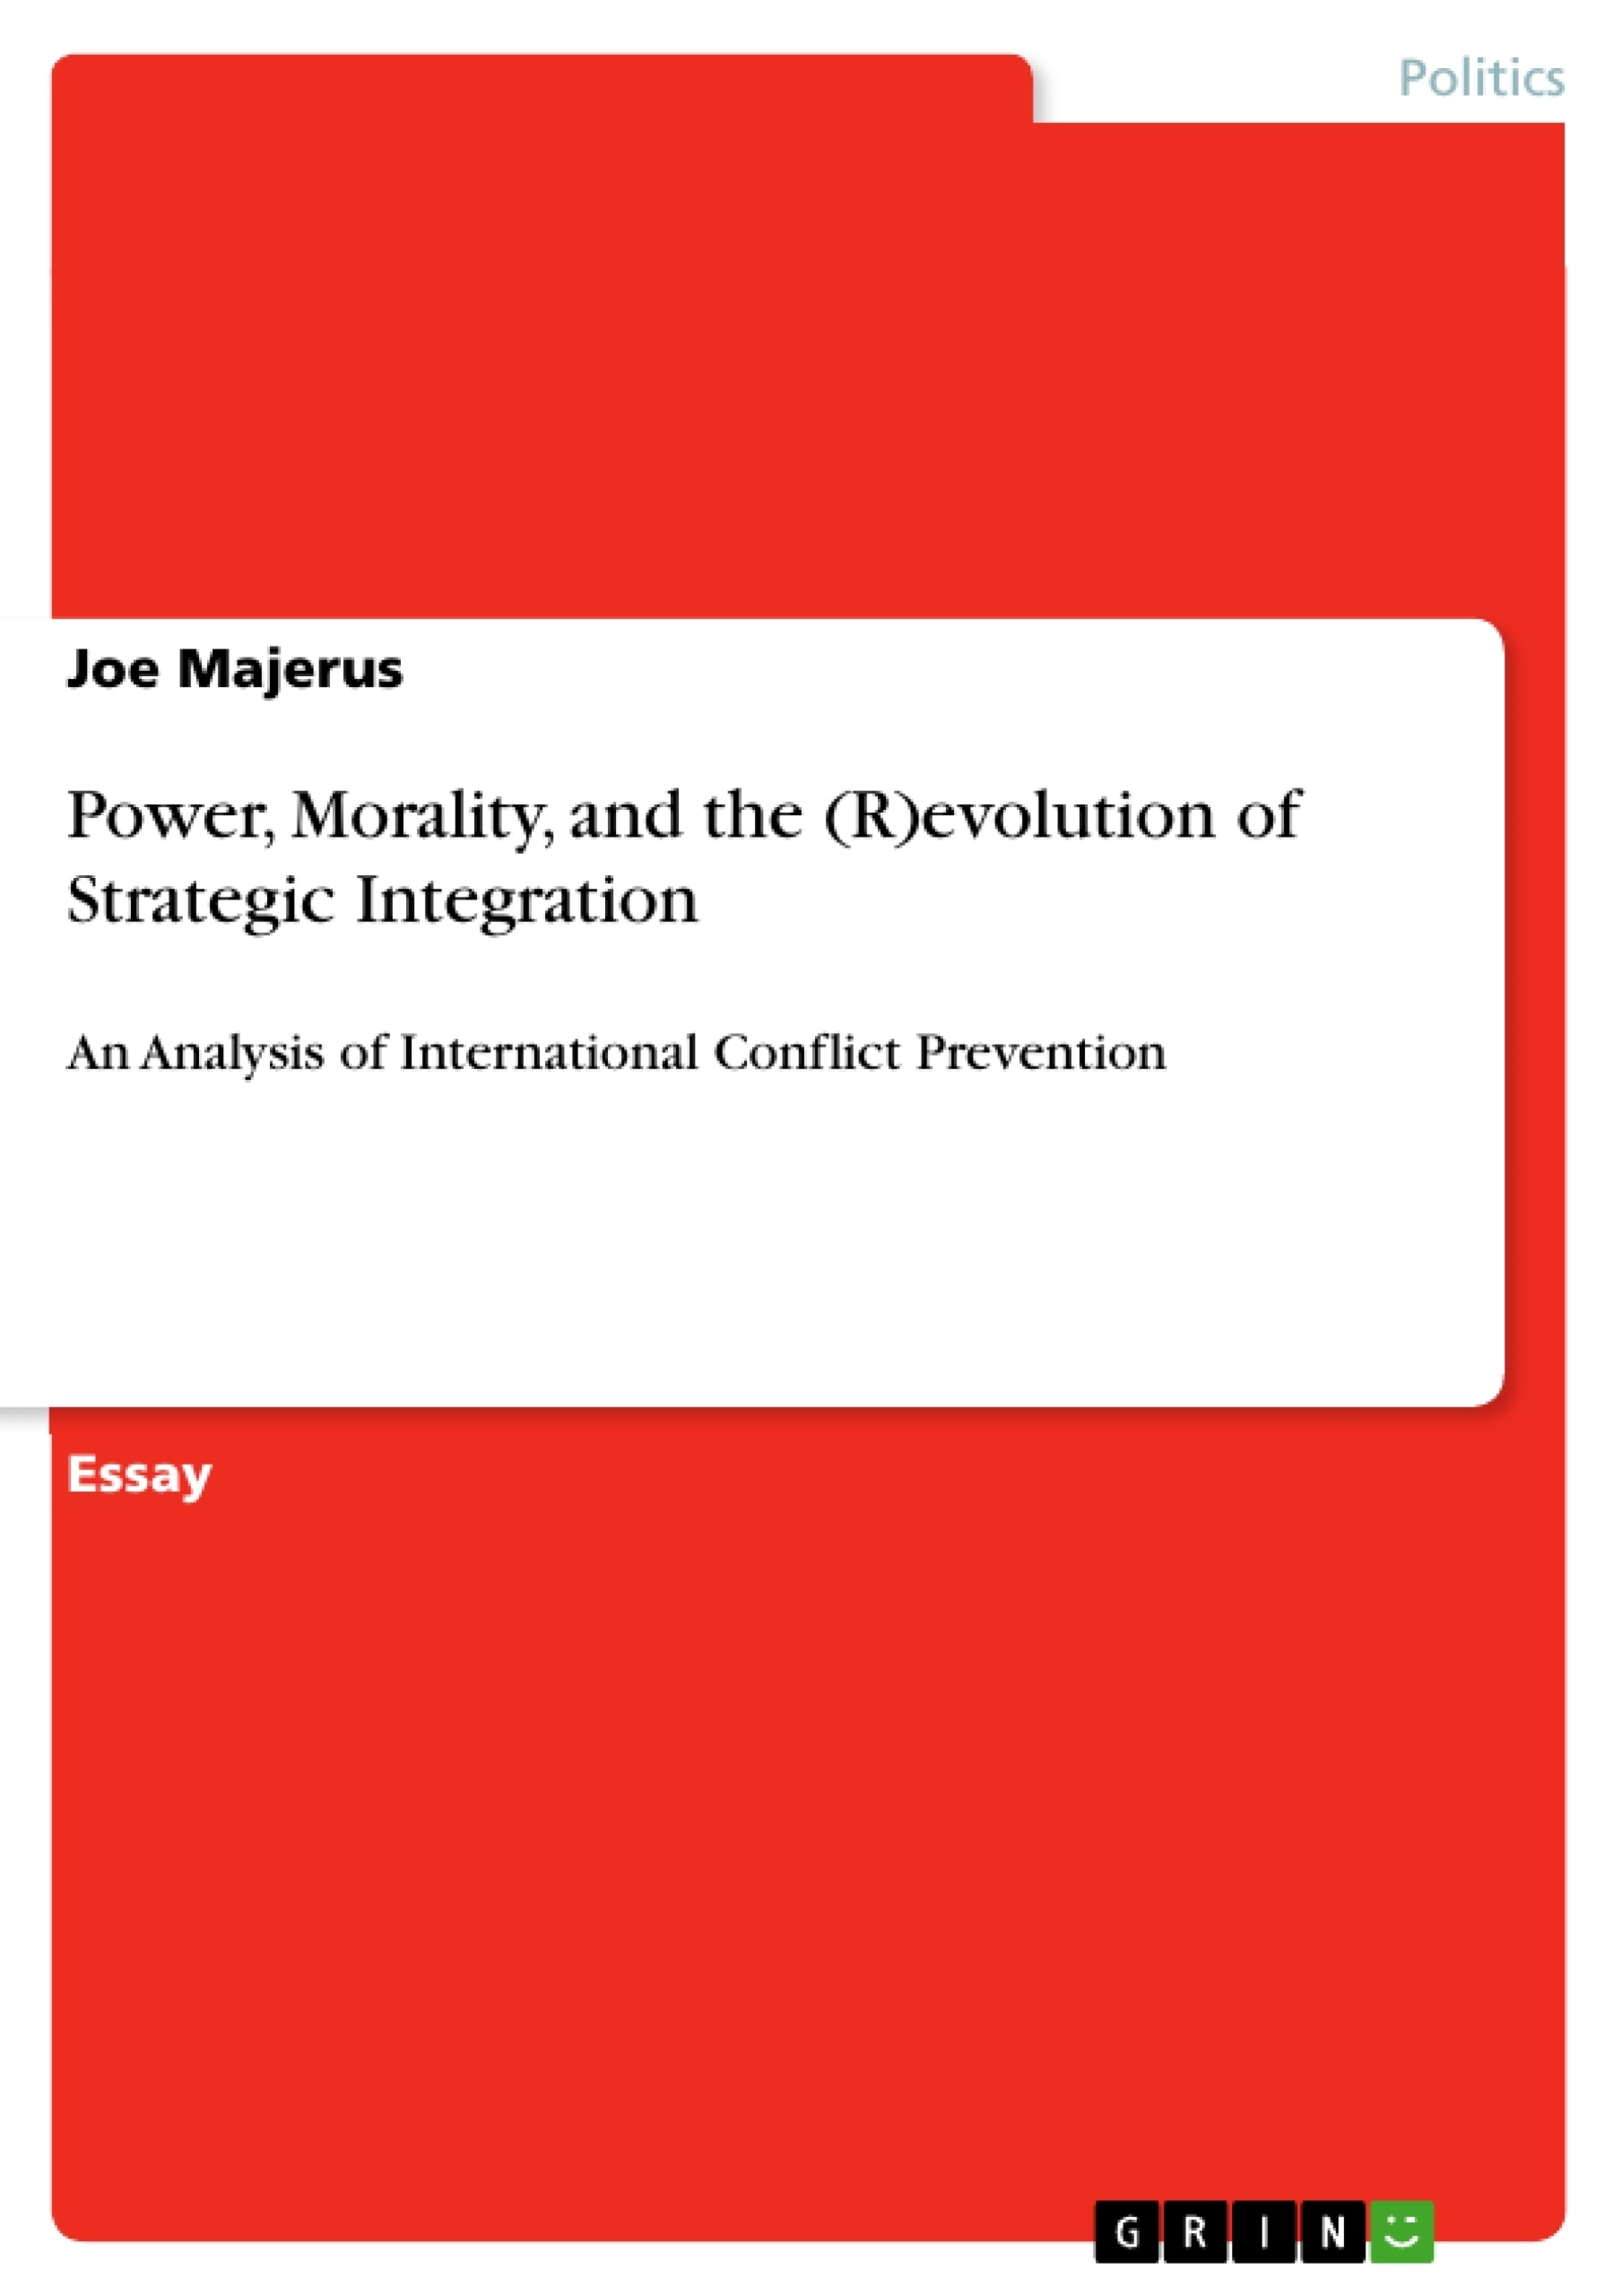 Title: Power, Morality, and the (R)evolution of Strategic Integration